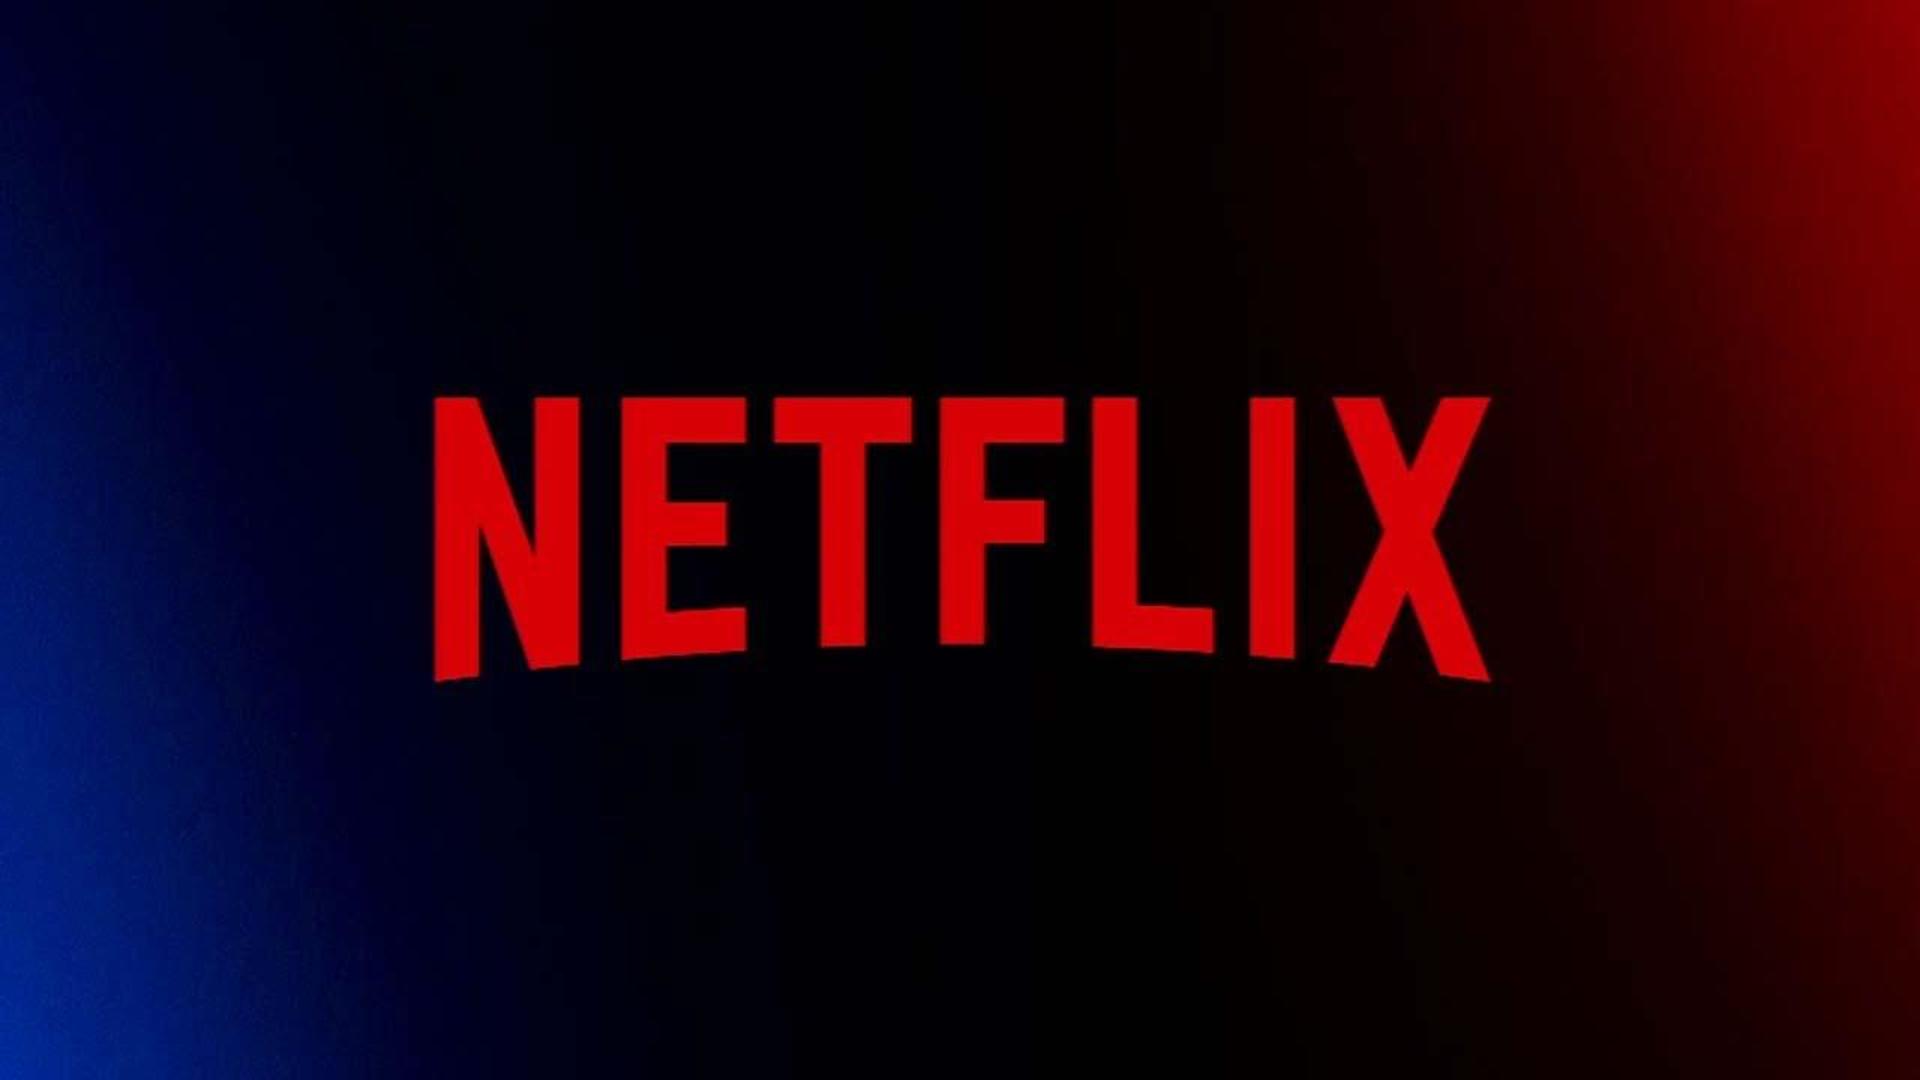 Netflix to increase Asia content spending by 15%